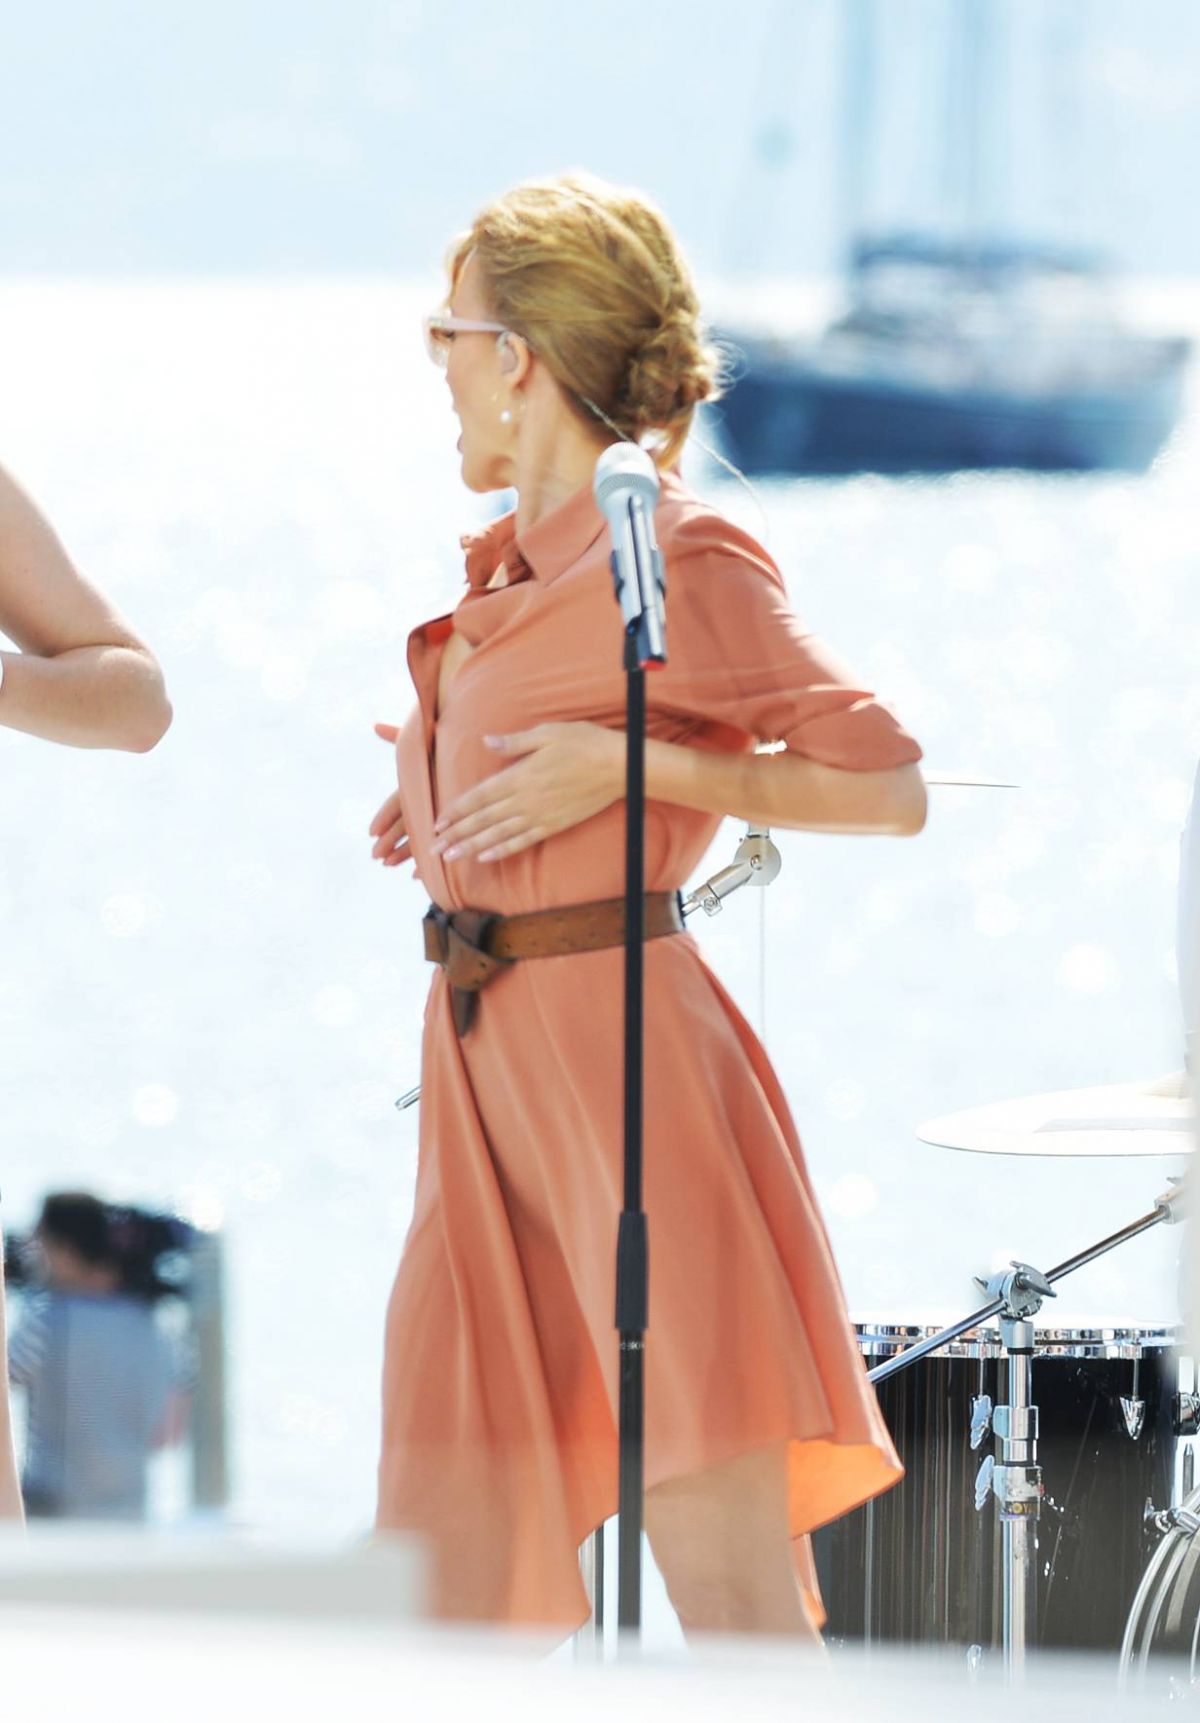 https://www.hawtcelebs.com/wp-content/uploads/2014/05/kylie-minogue-performs-at-stage-of-canal-in-cannes_10.jpg